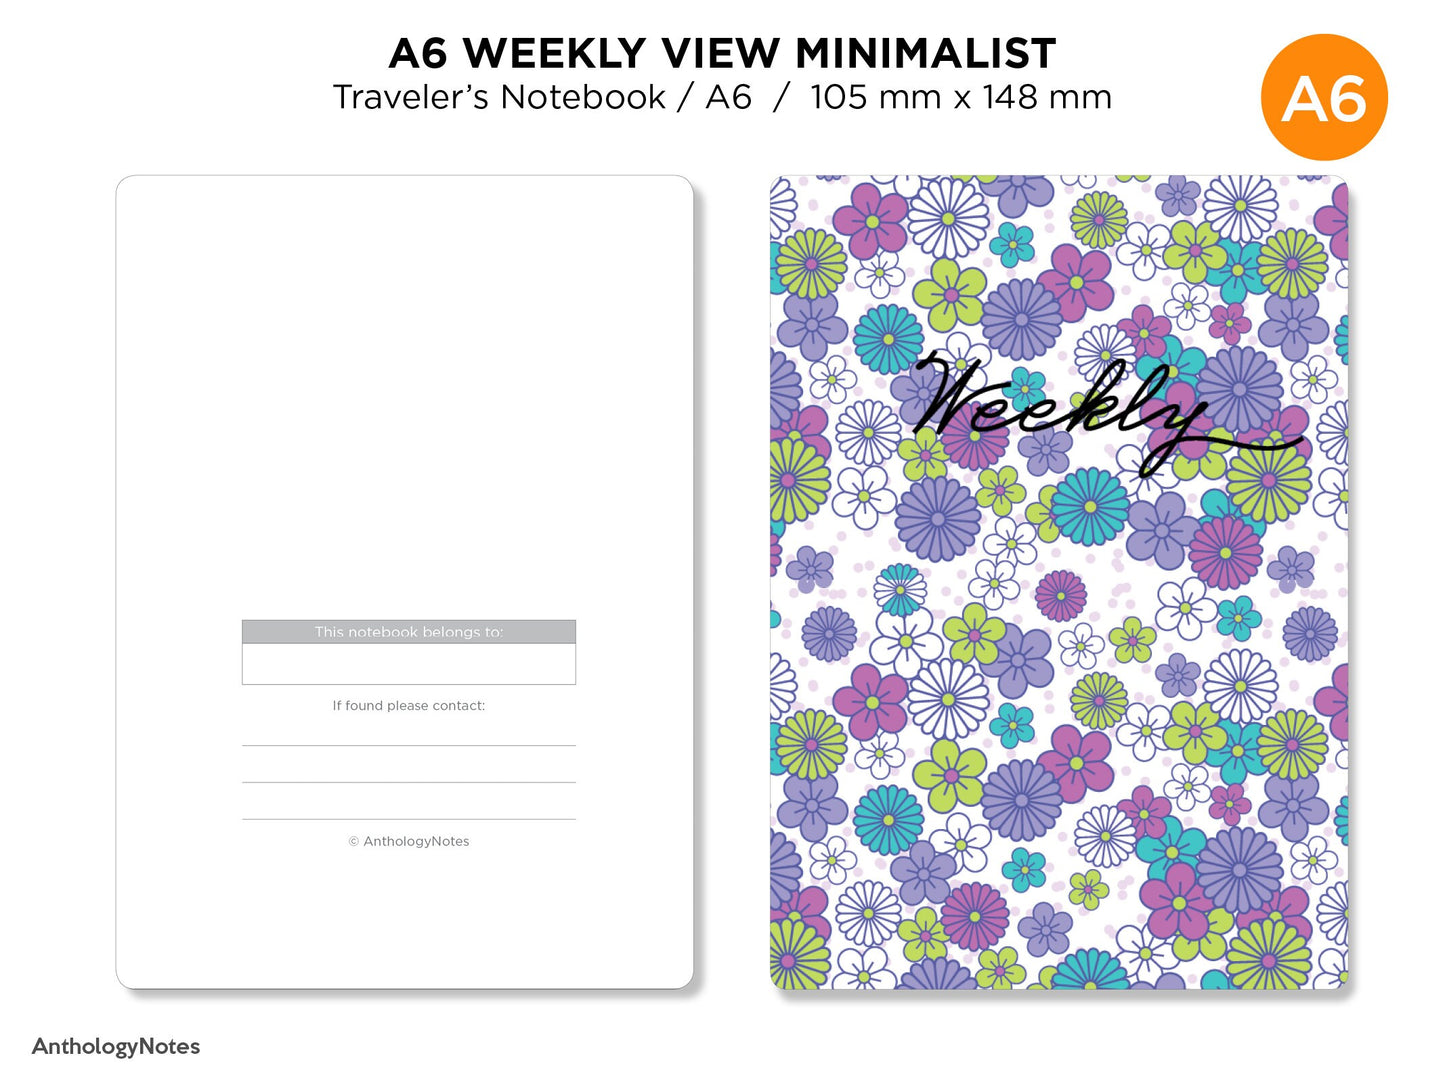 A6 WEEKLY Traveler's Notebook NOTES Minimalist Function Printable TN Insert Wo2P